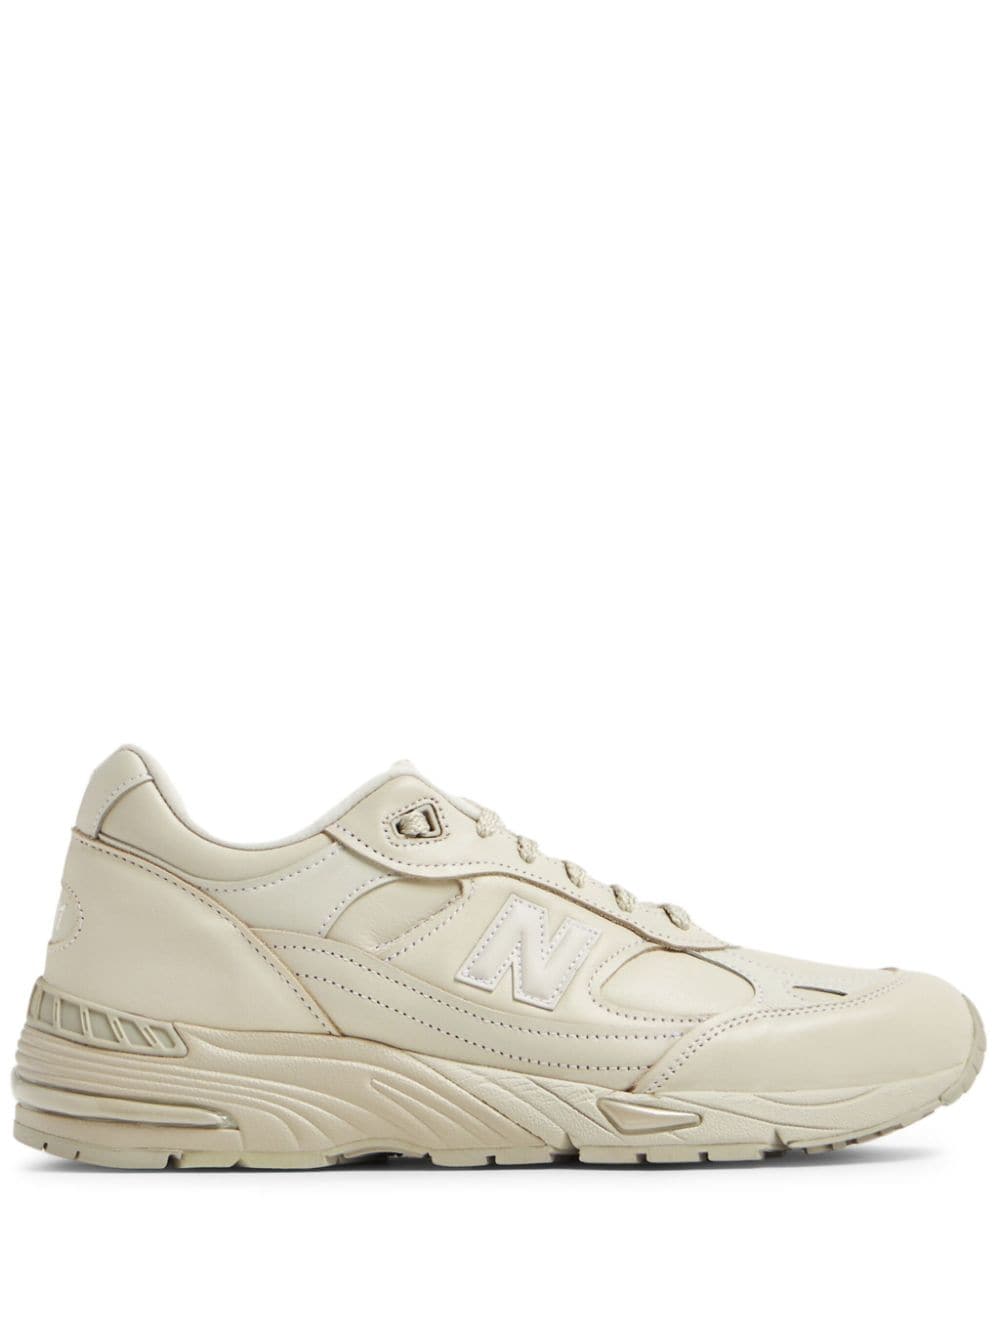 New Balance Made in UK 991v1 panelled sneakers - Neutrals